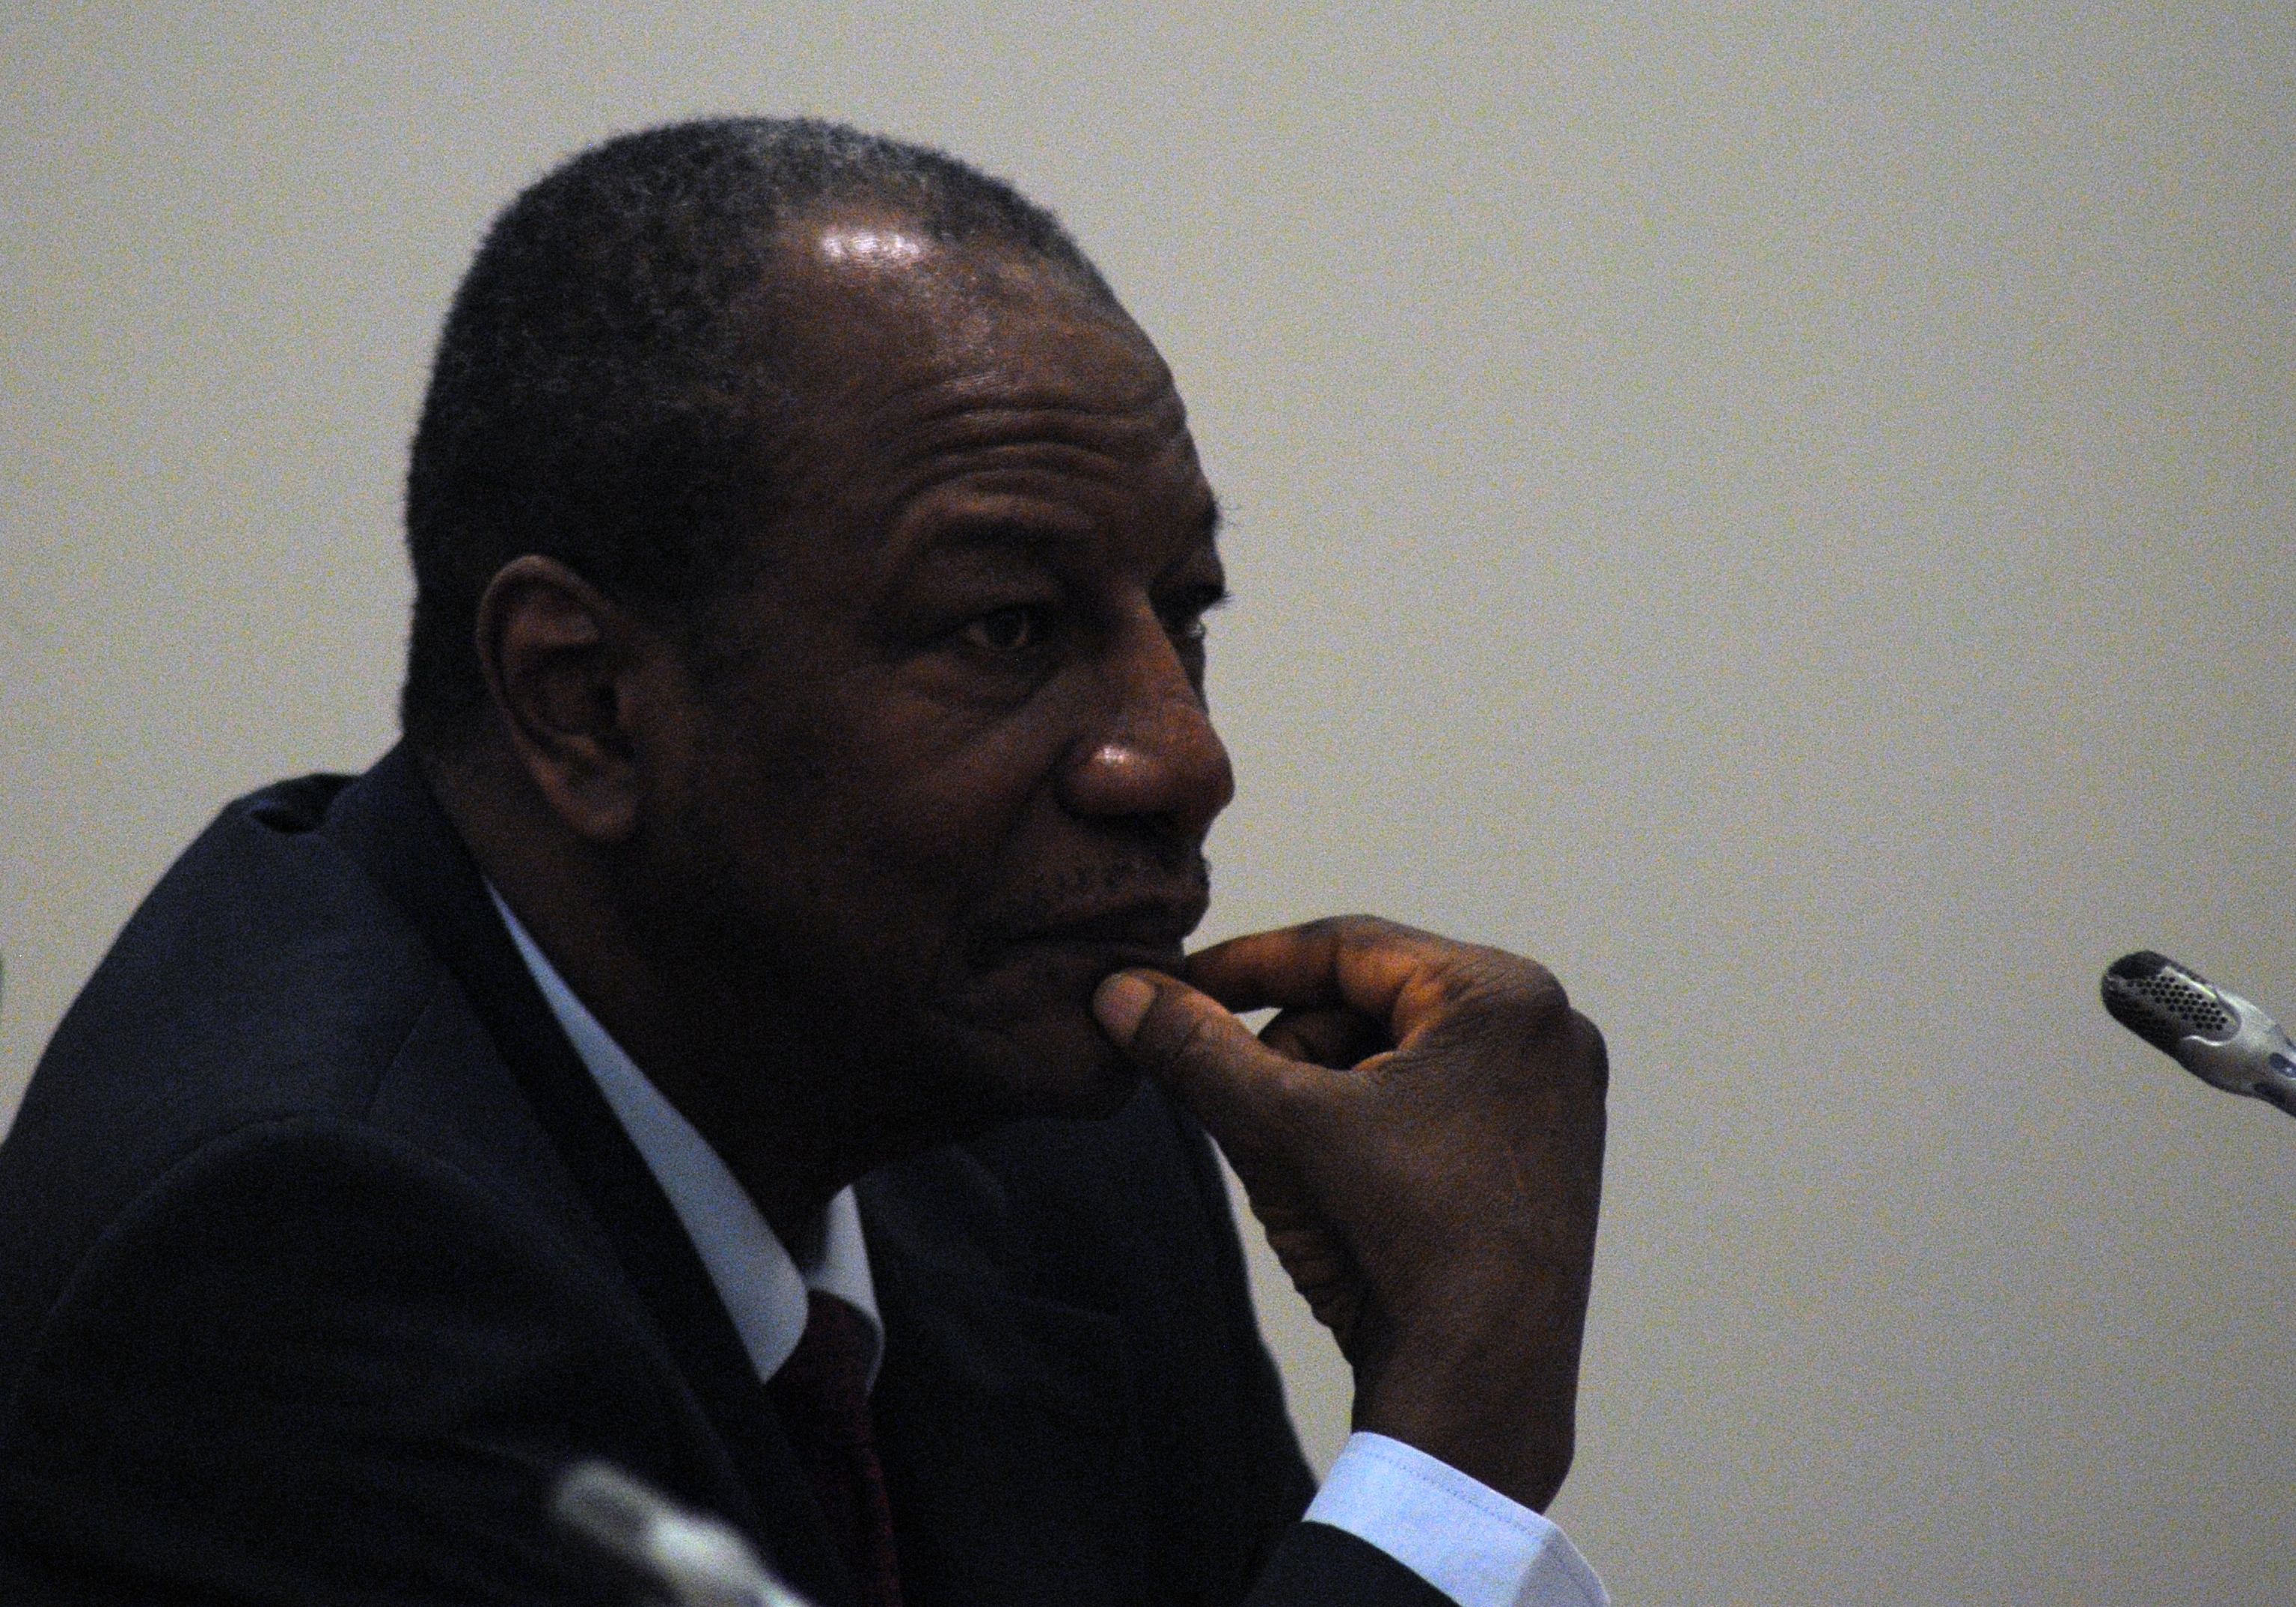 Alpha Condé, President of Guinea (photo credit: Chatham House/flickr)